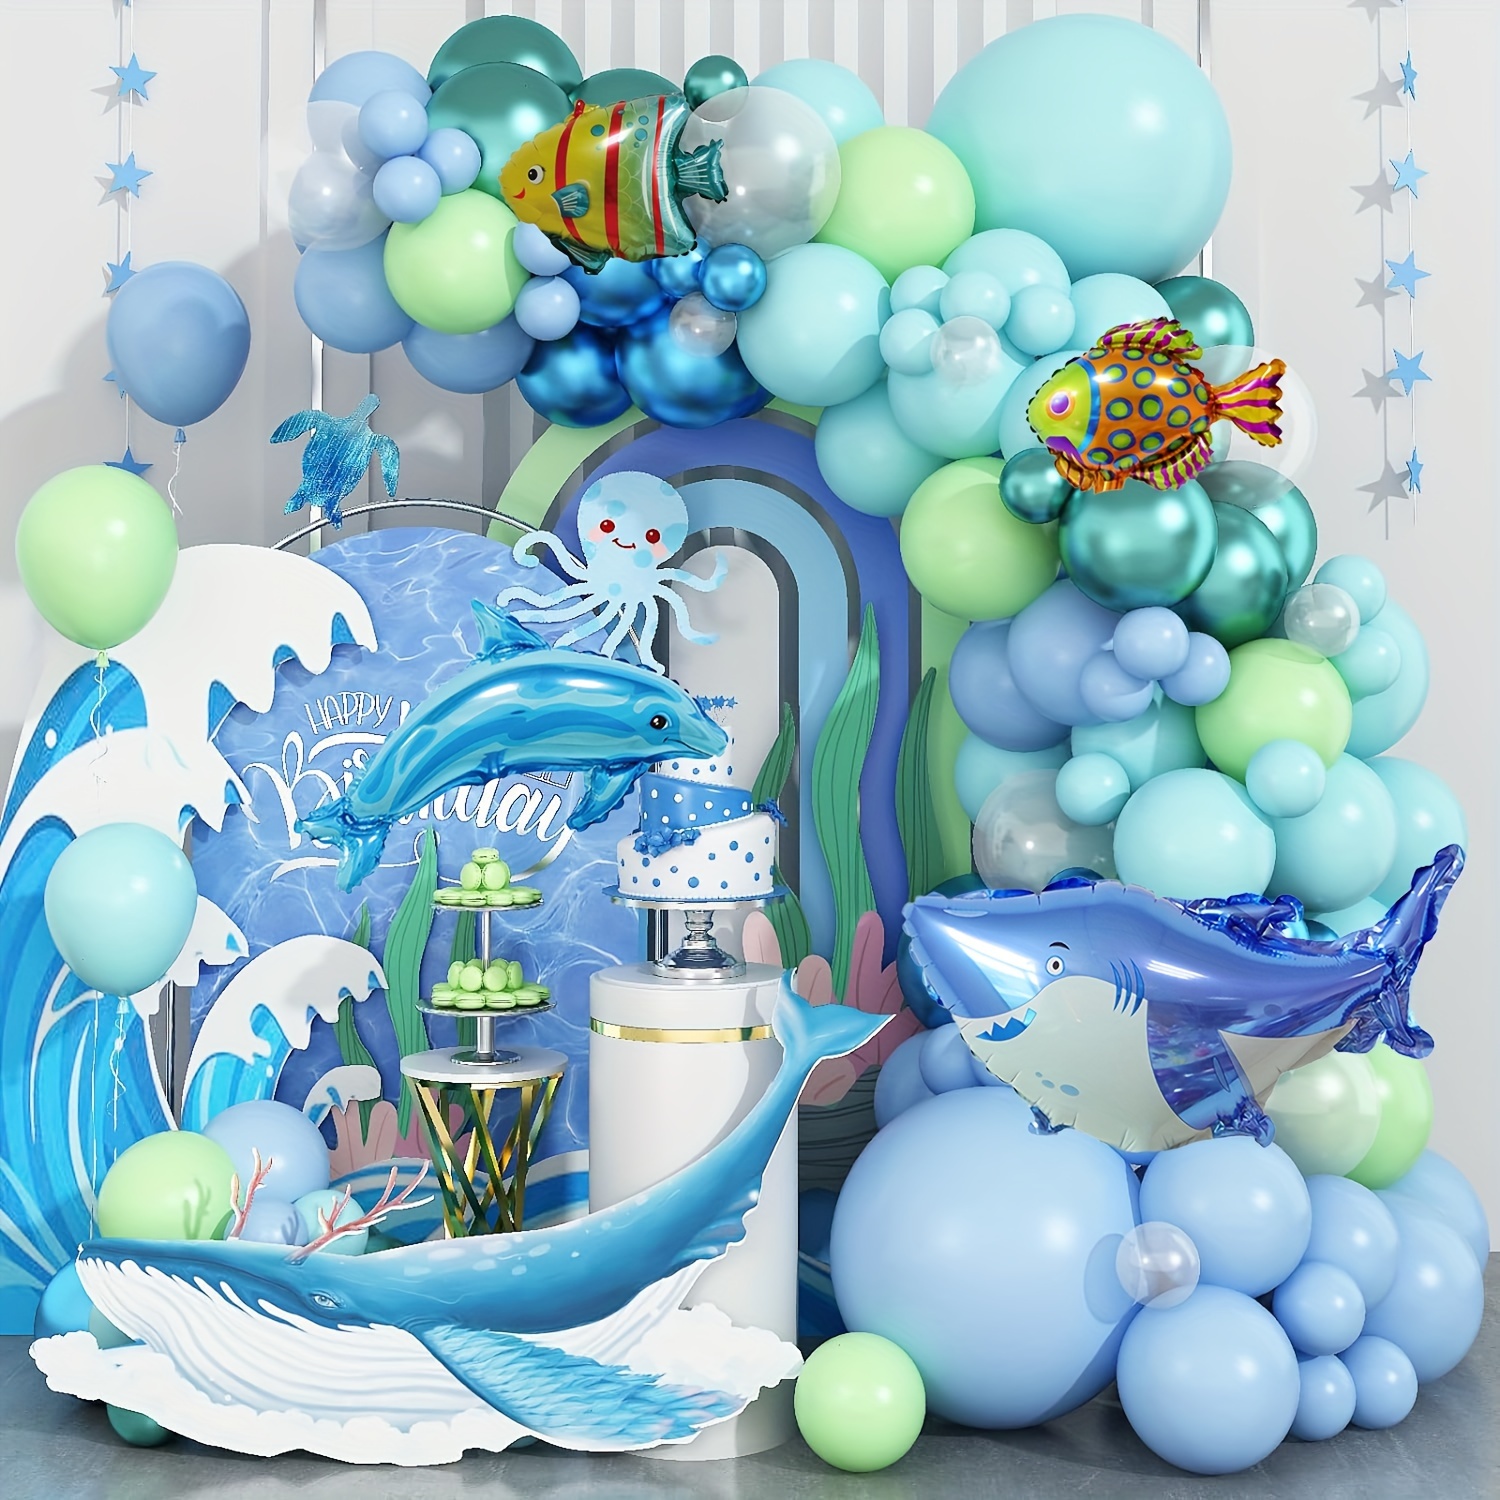 

114pcs Ocean Themed Balloon Arch Kit With Shark & Fish Foil Balloons, Summer Party Decorations For All Ages - Tape Included, Perfect For Birthday & Seasonal Celebrations